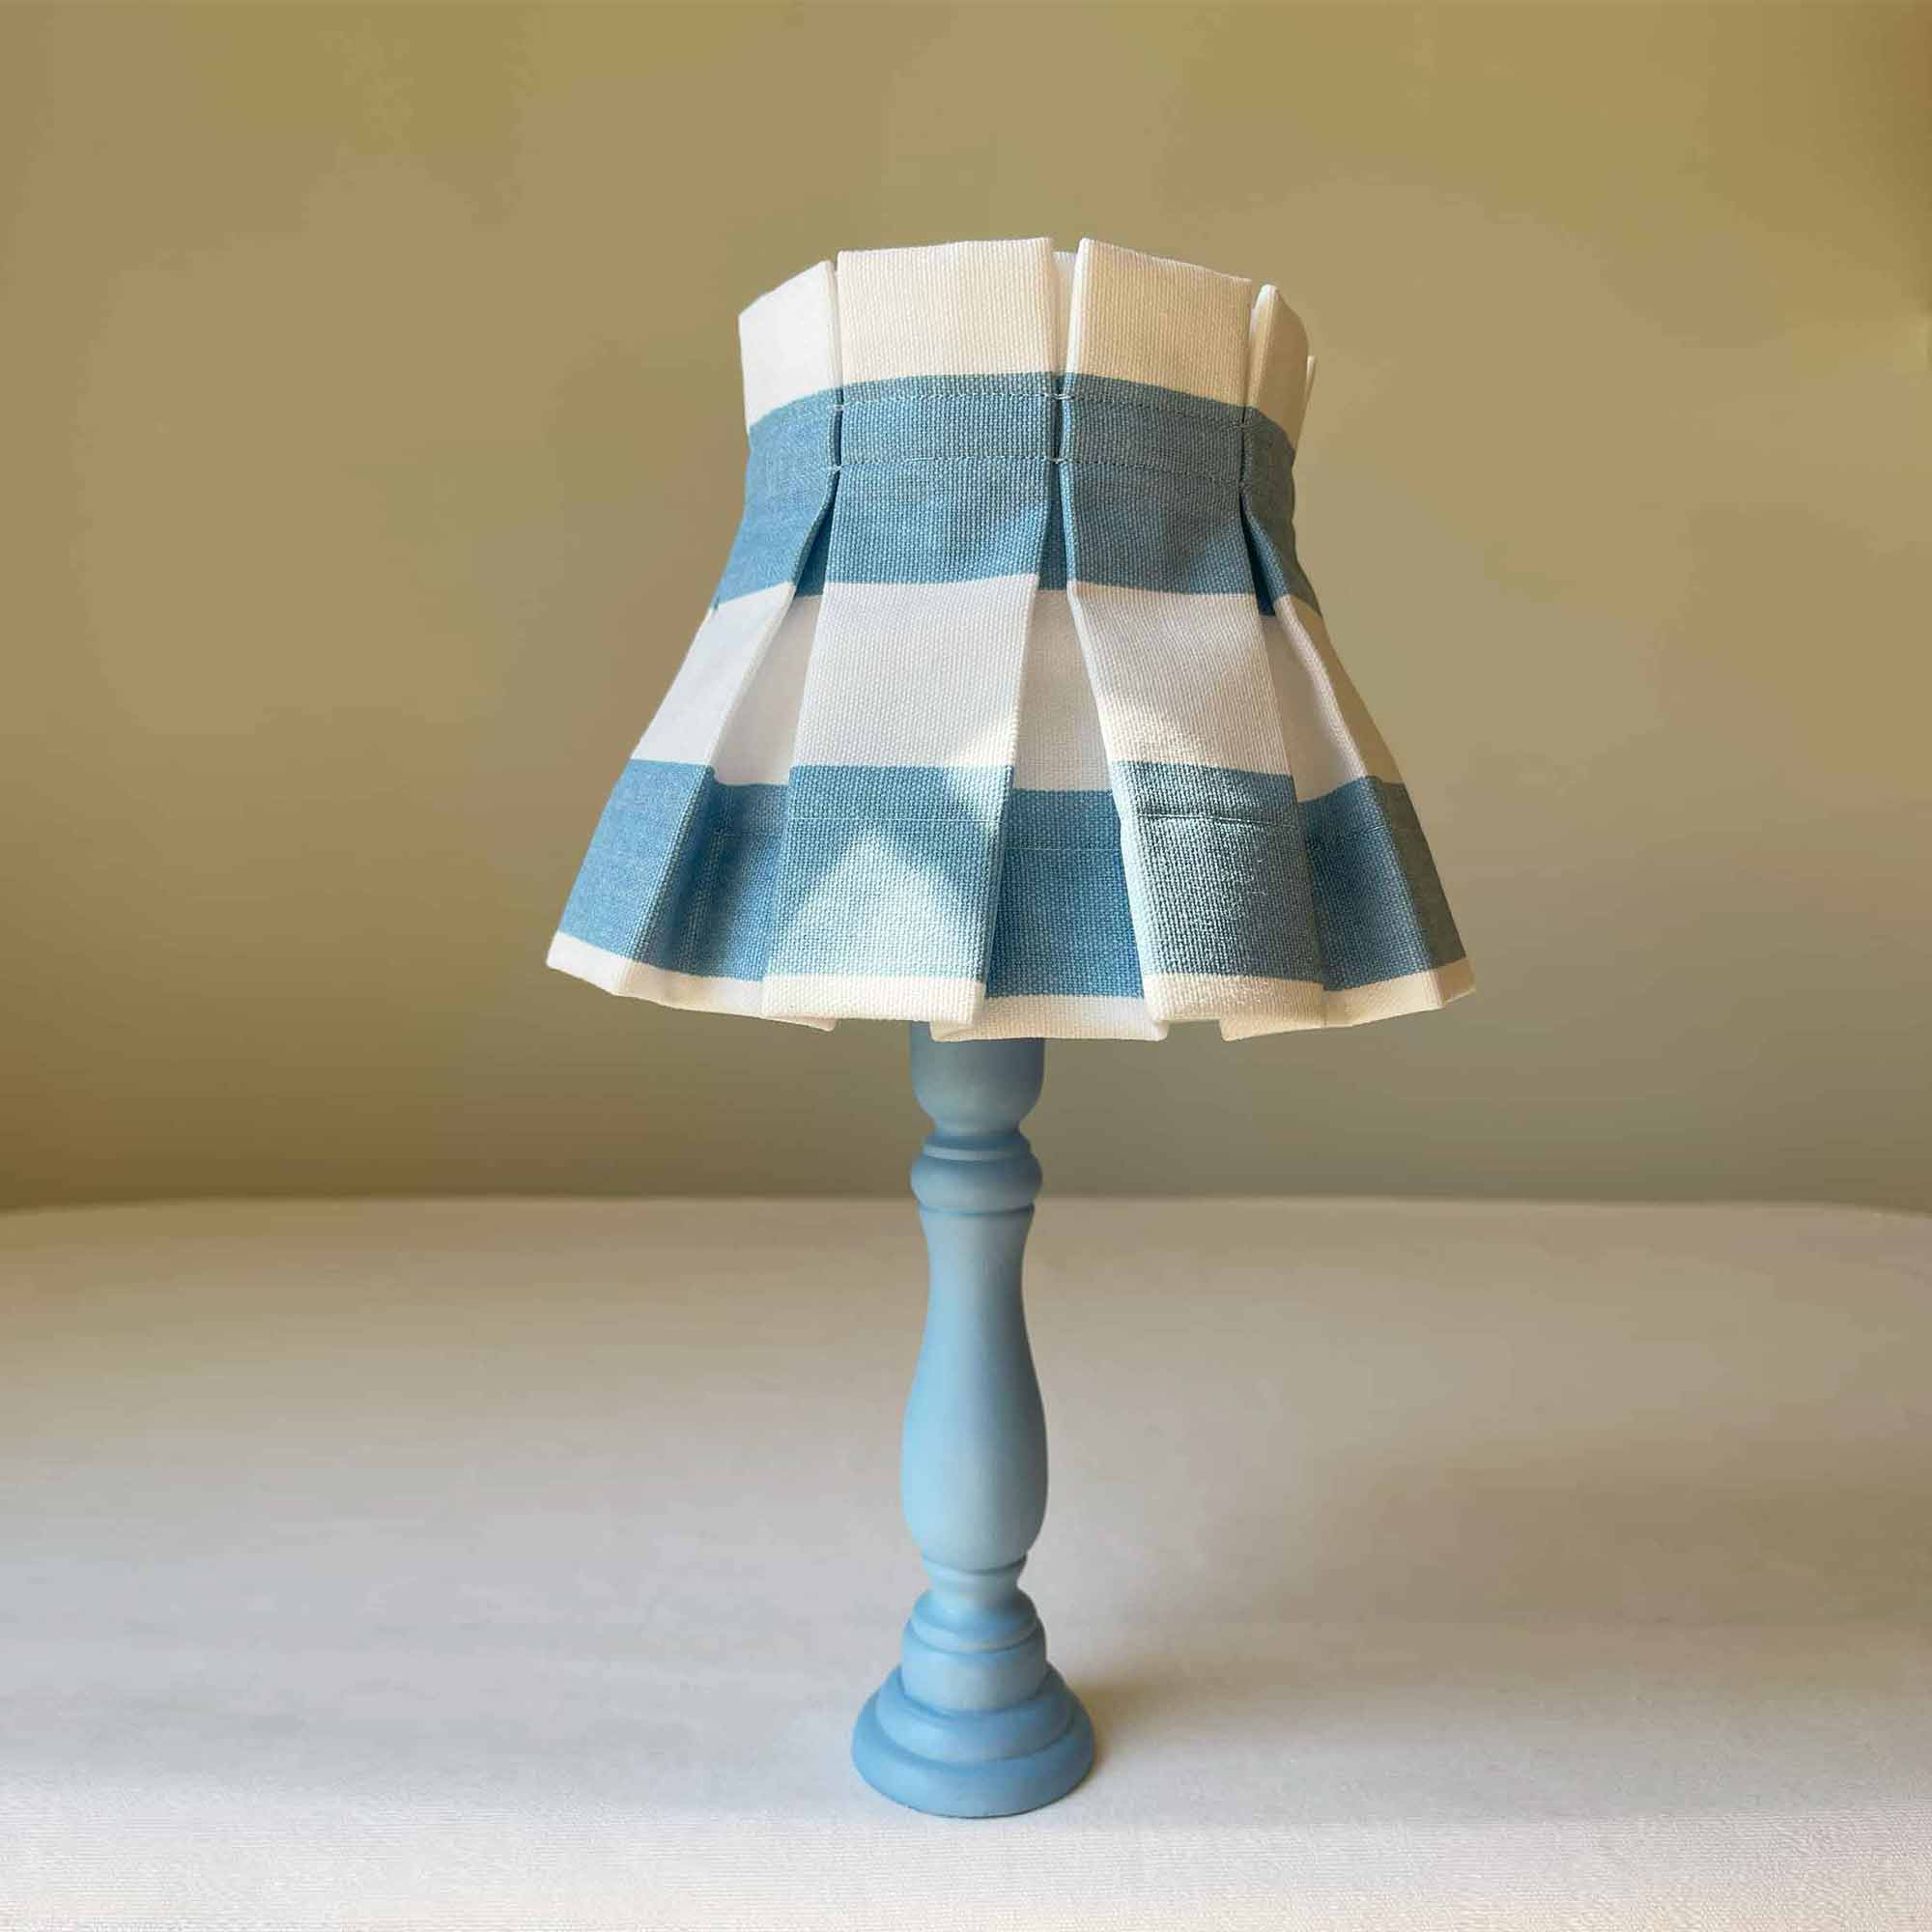 light blue and white lampshade with a candle clip fits wall sconces and chandeliers perfectly.